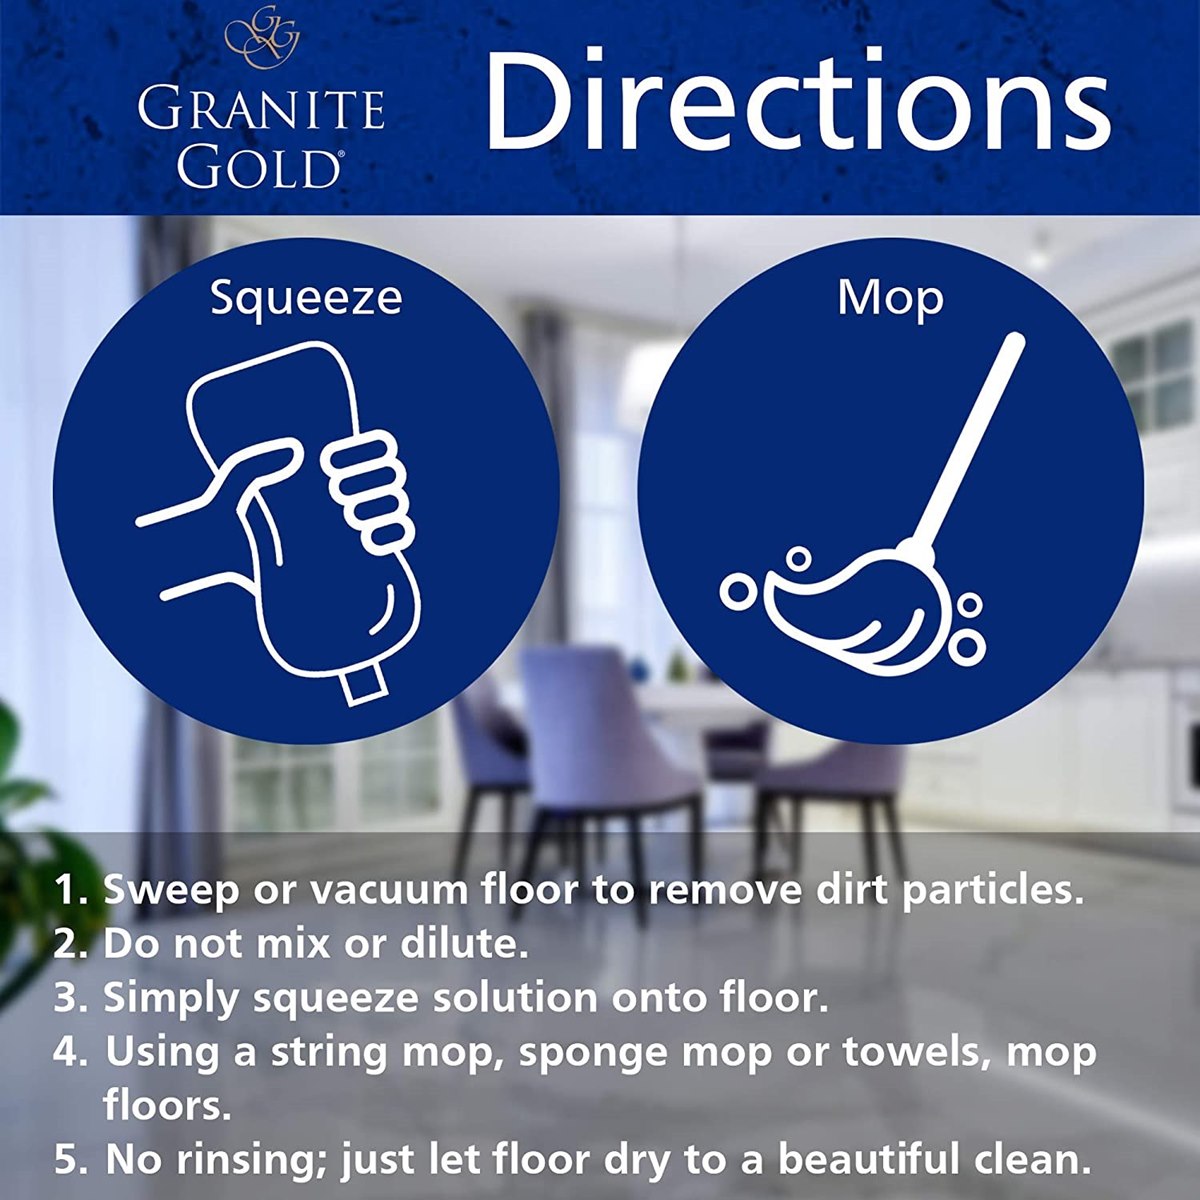 How to Use Granite Gold Squeeze and Mop Floor Cleaner